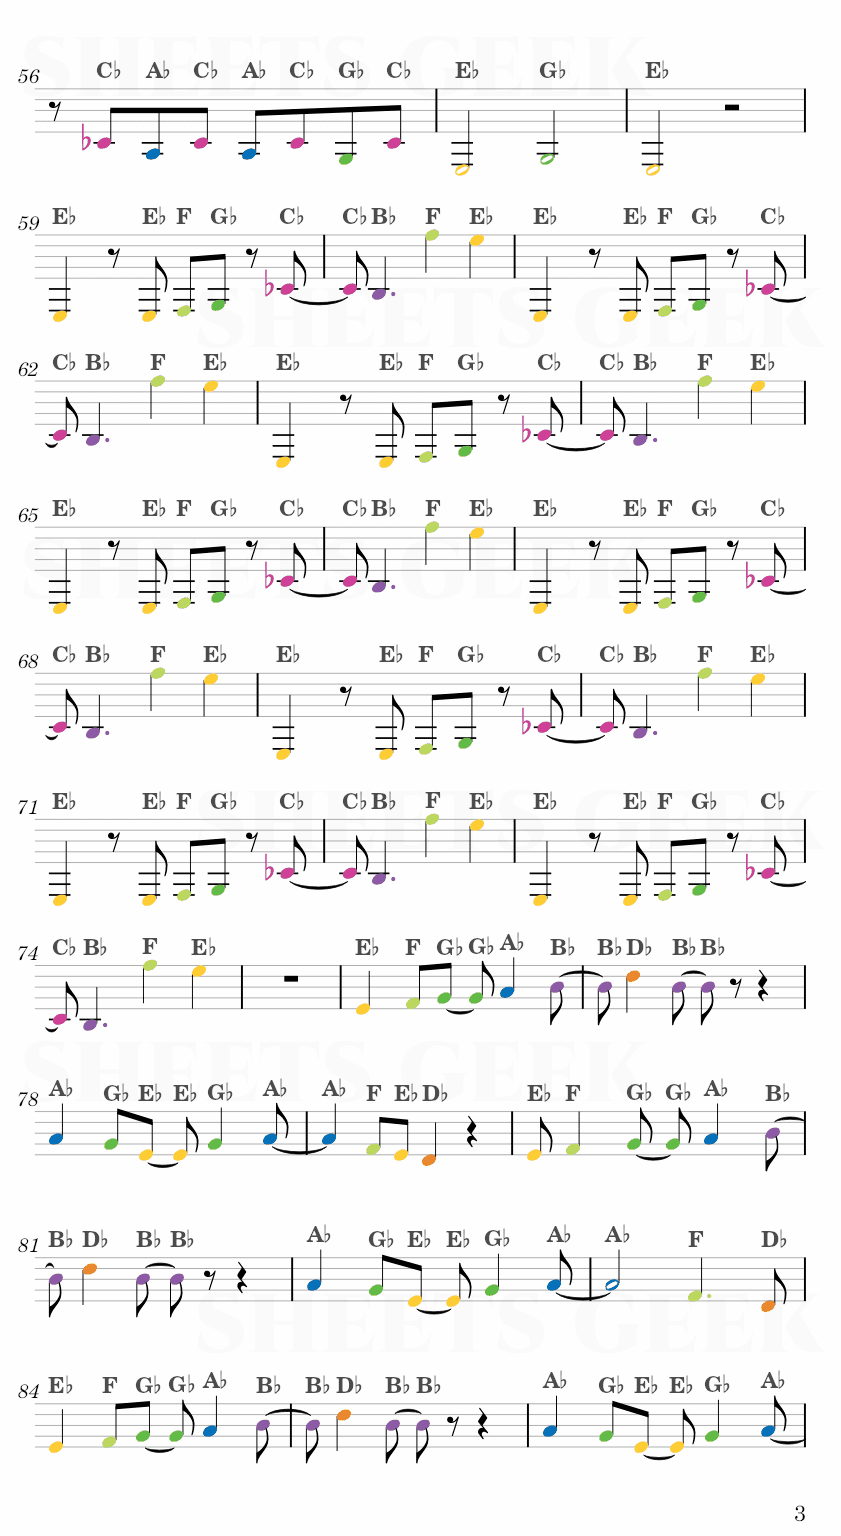 Feel Good Inc. - Gorillaz Easy Sheet Music Free for piano, keyboard, flute, violin, sax, cello page 3